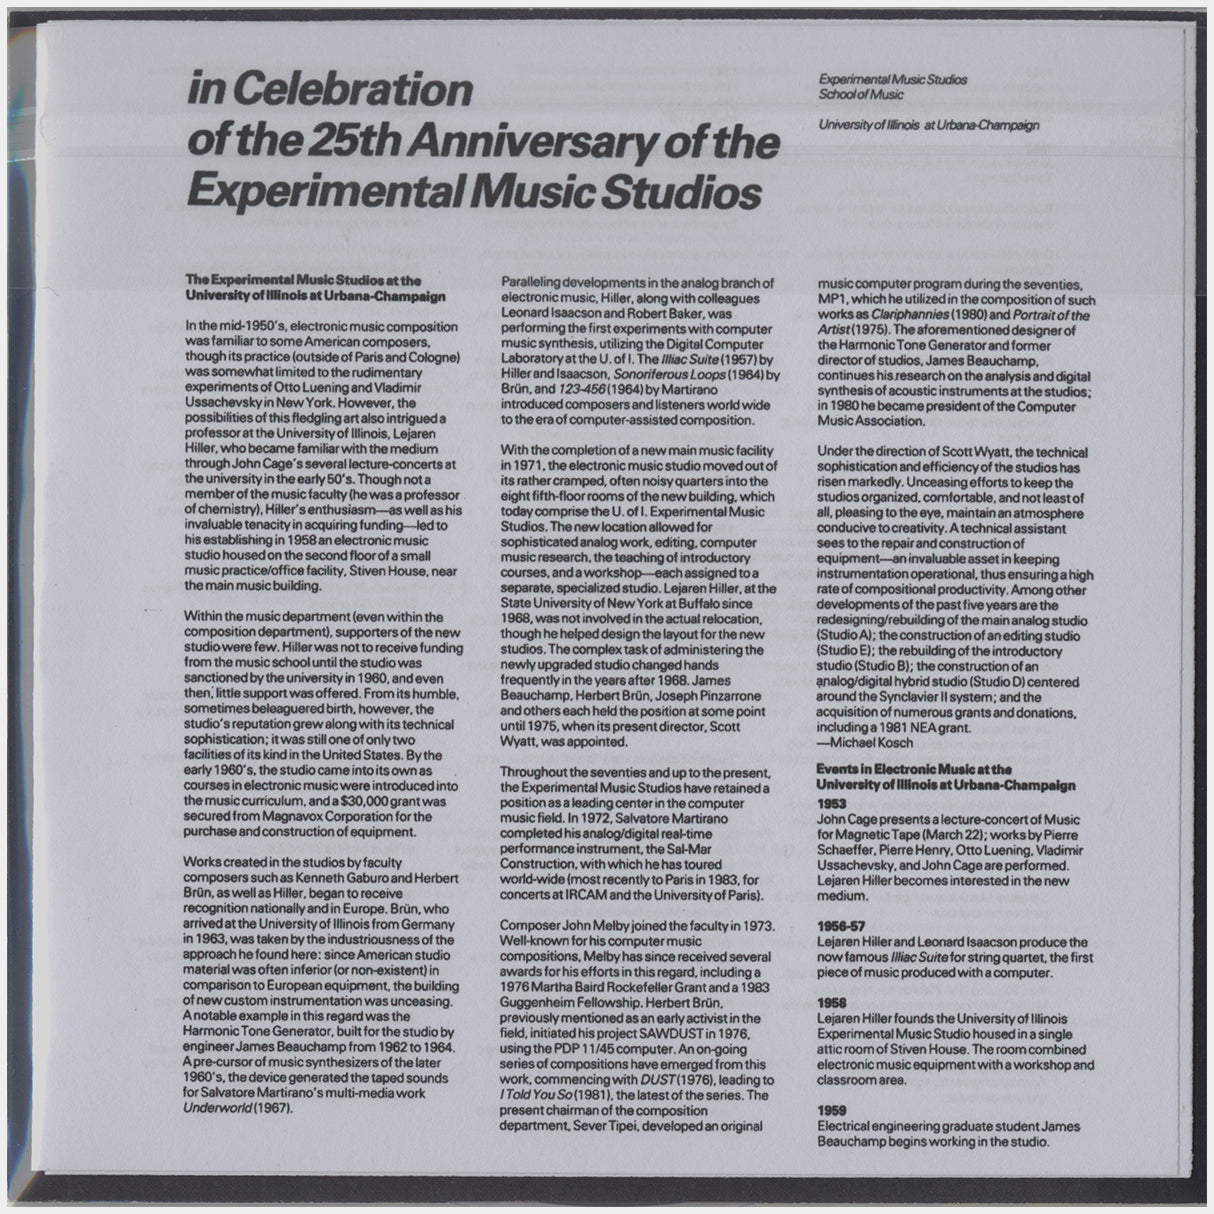 [CP 205 CD] in Celebration of the 25th Anniversary of the Experimental Music Studios